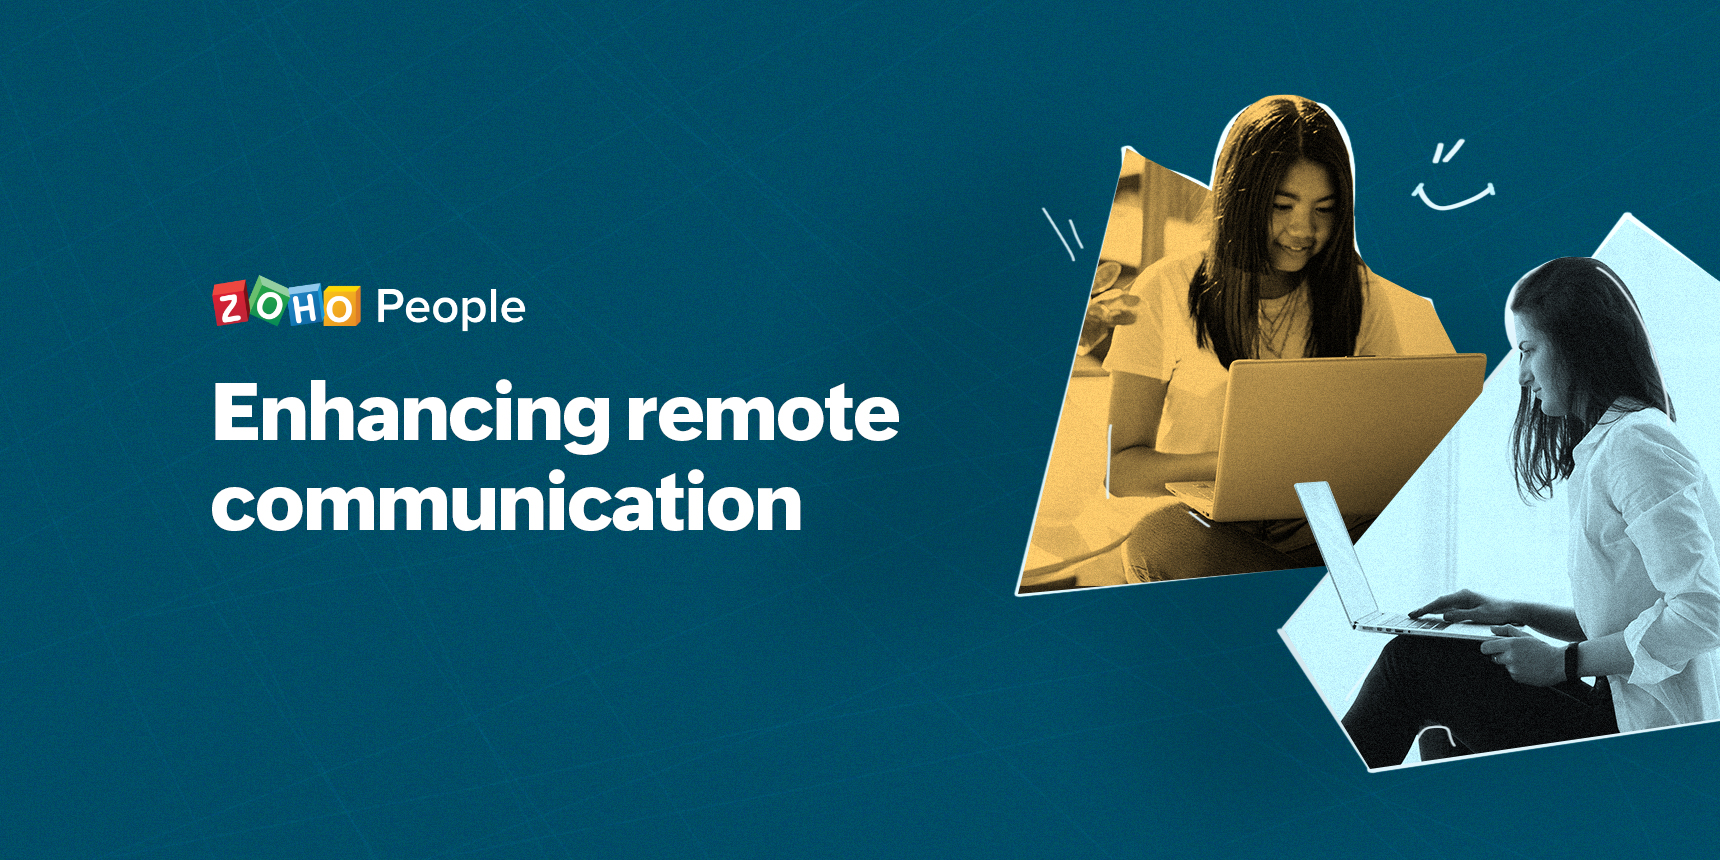 Tips to improve remote communication and collaboration